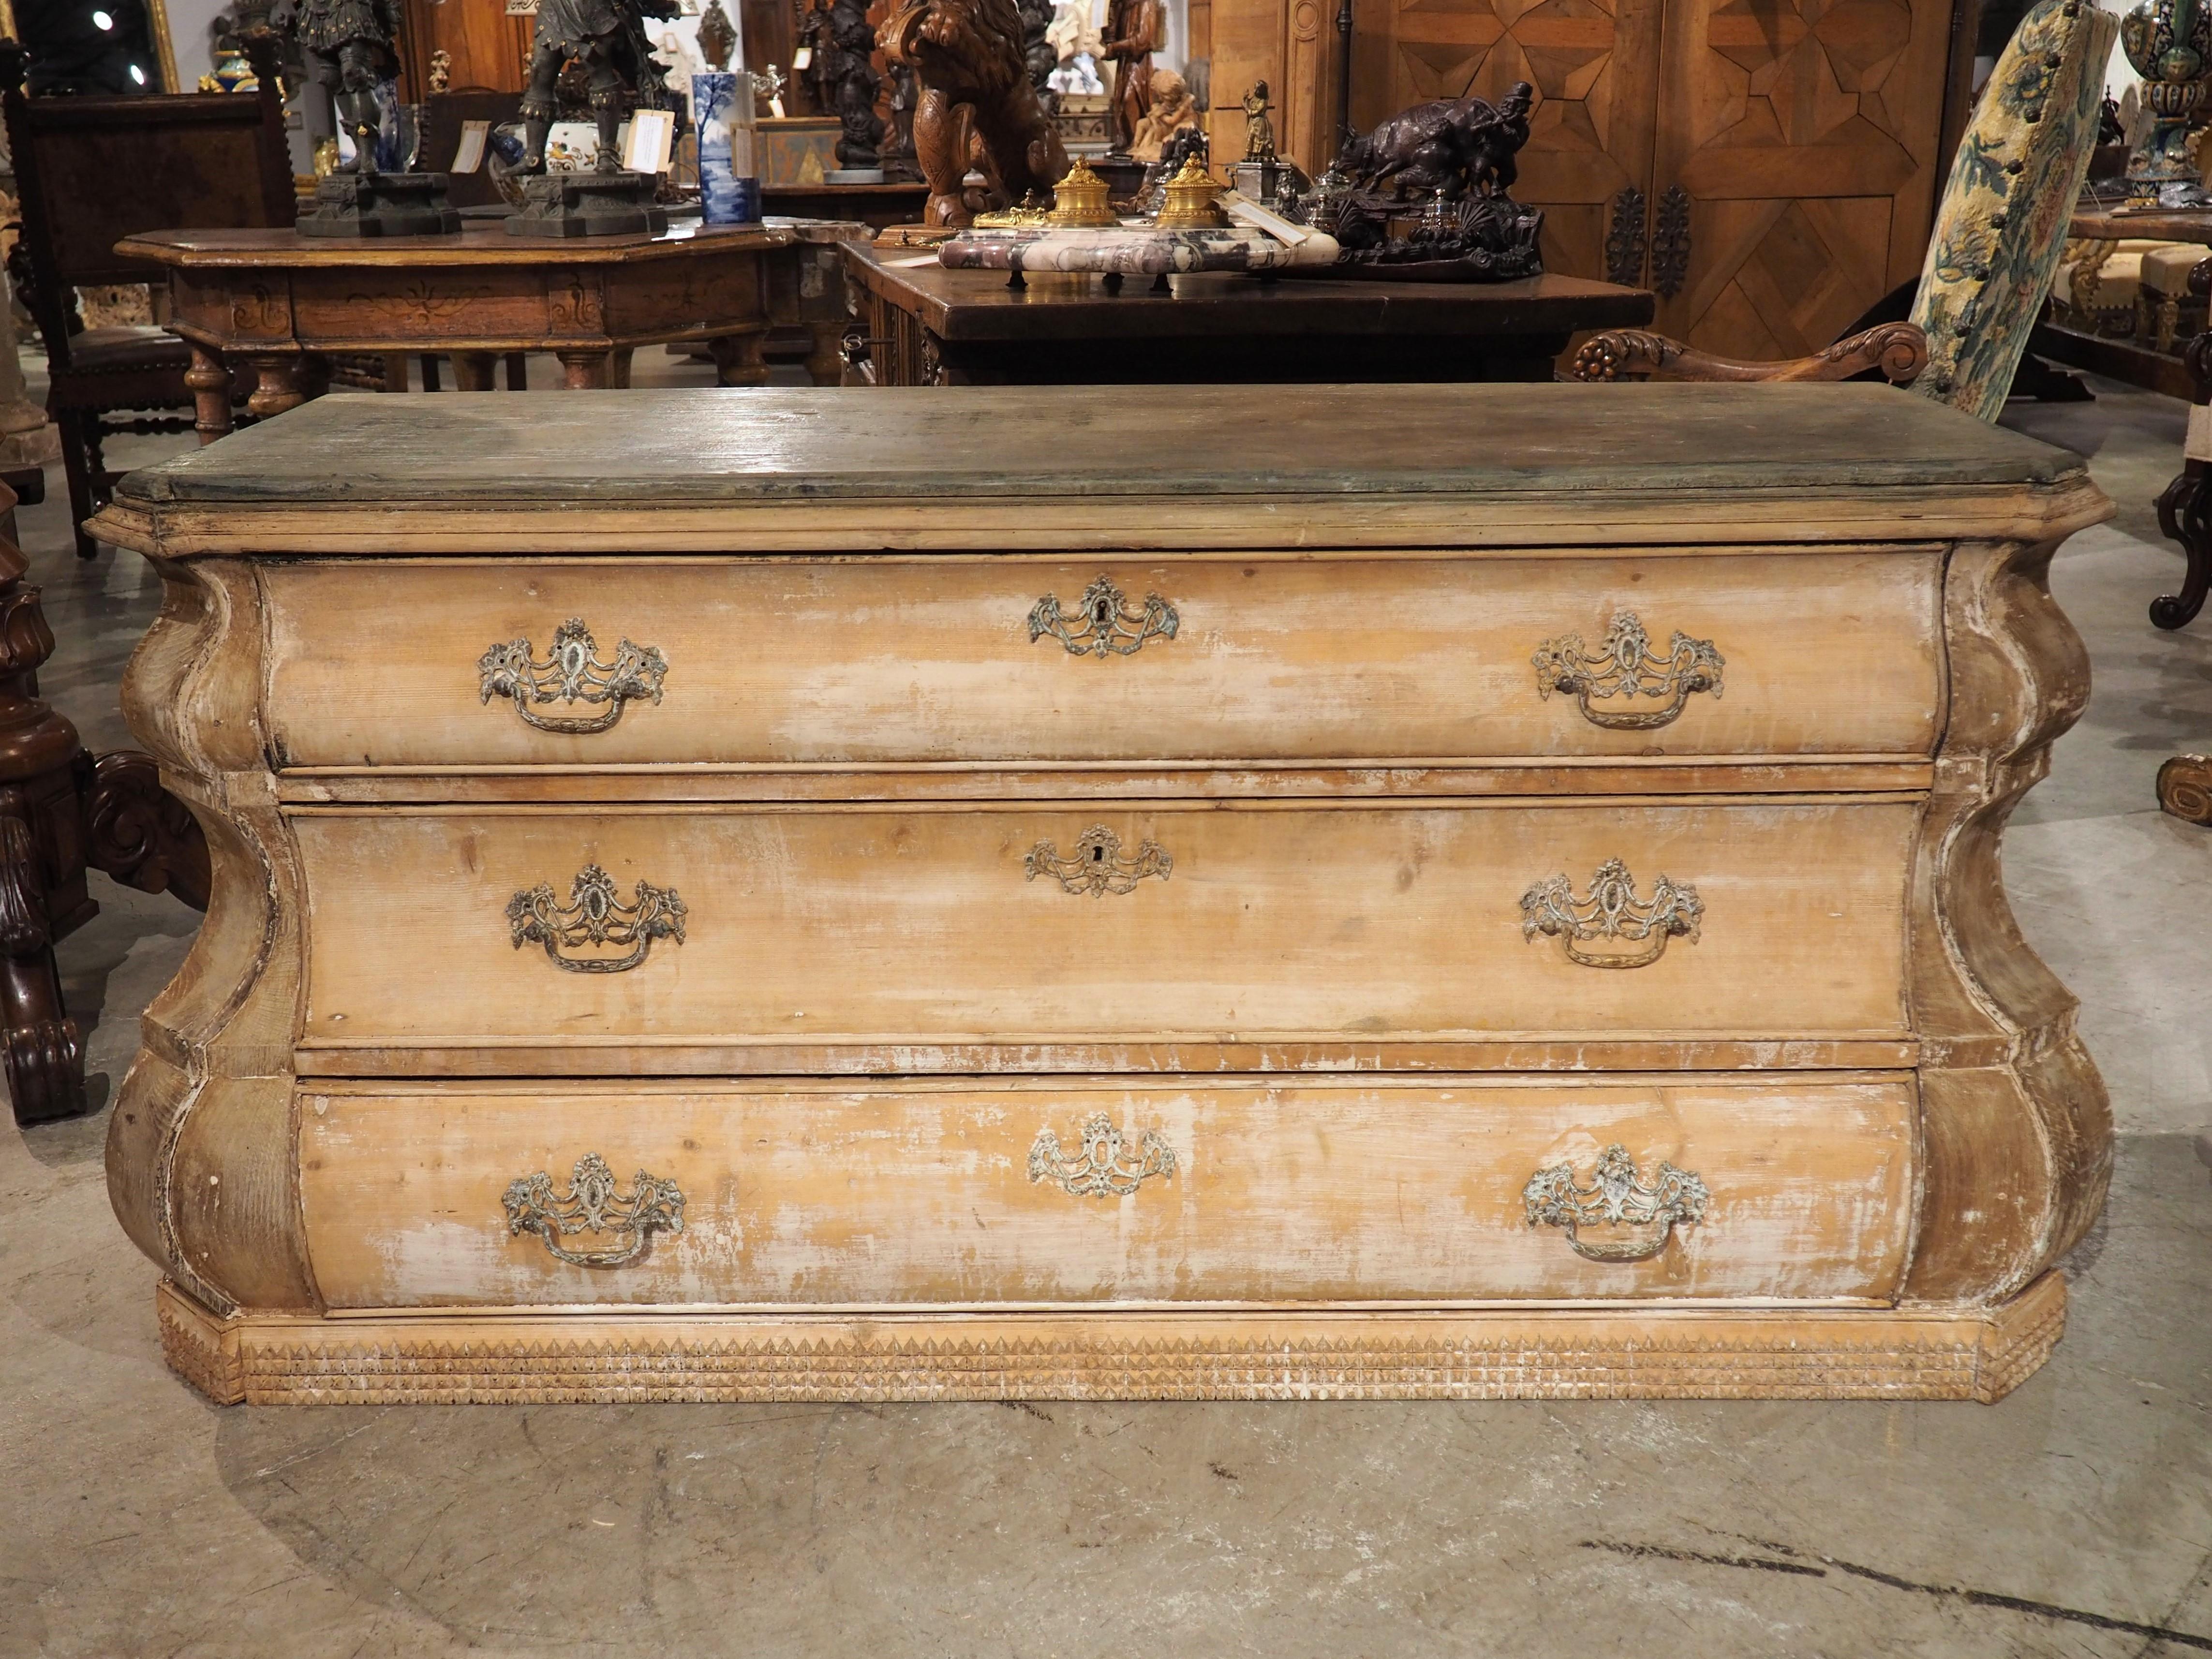 Metal A Long Antique Dutch Chest of Drawers with Partial Whitewash, Circa 1890